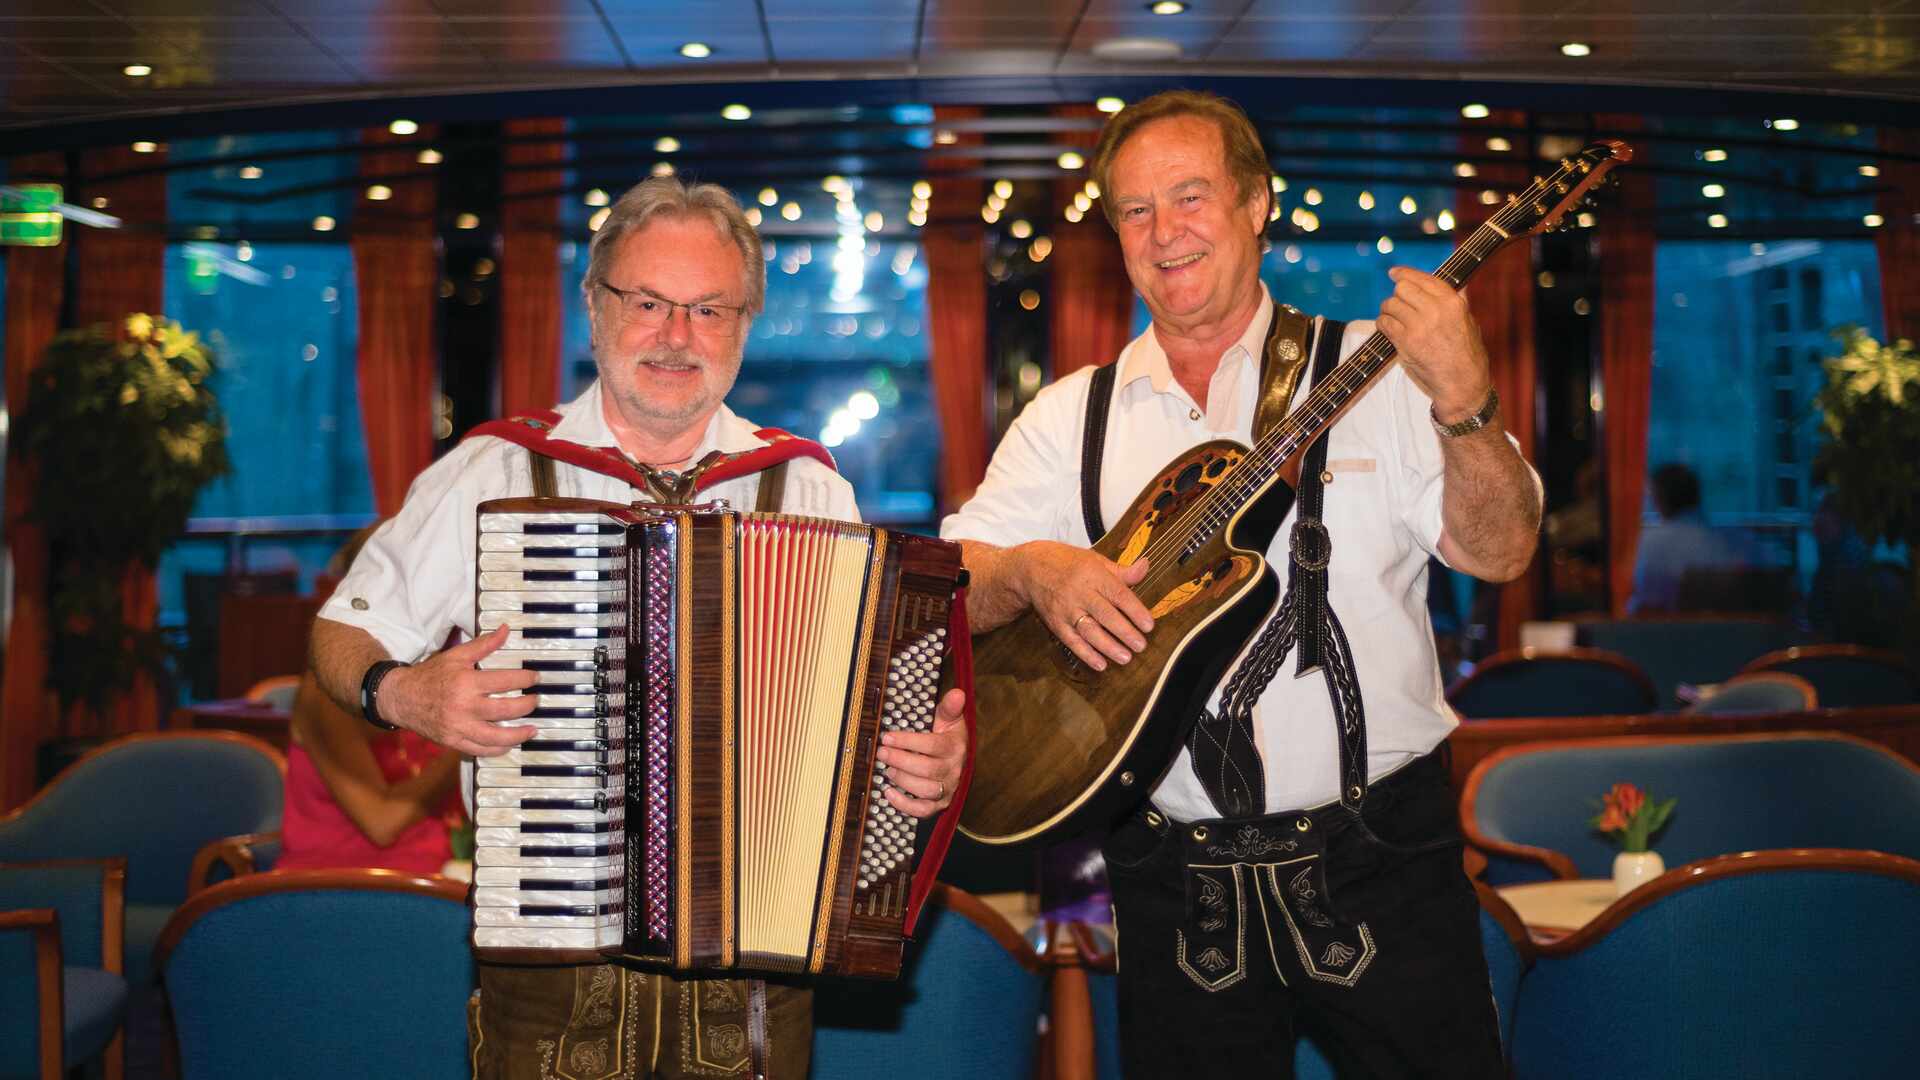 View of Bavarian musicians, onboard entertainment for Contemporary River Ships